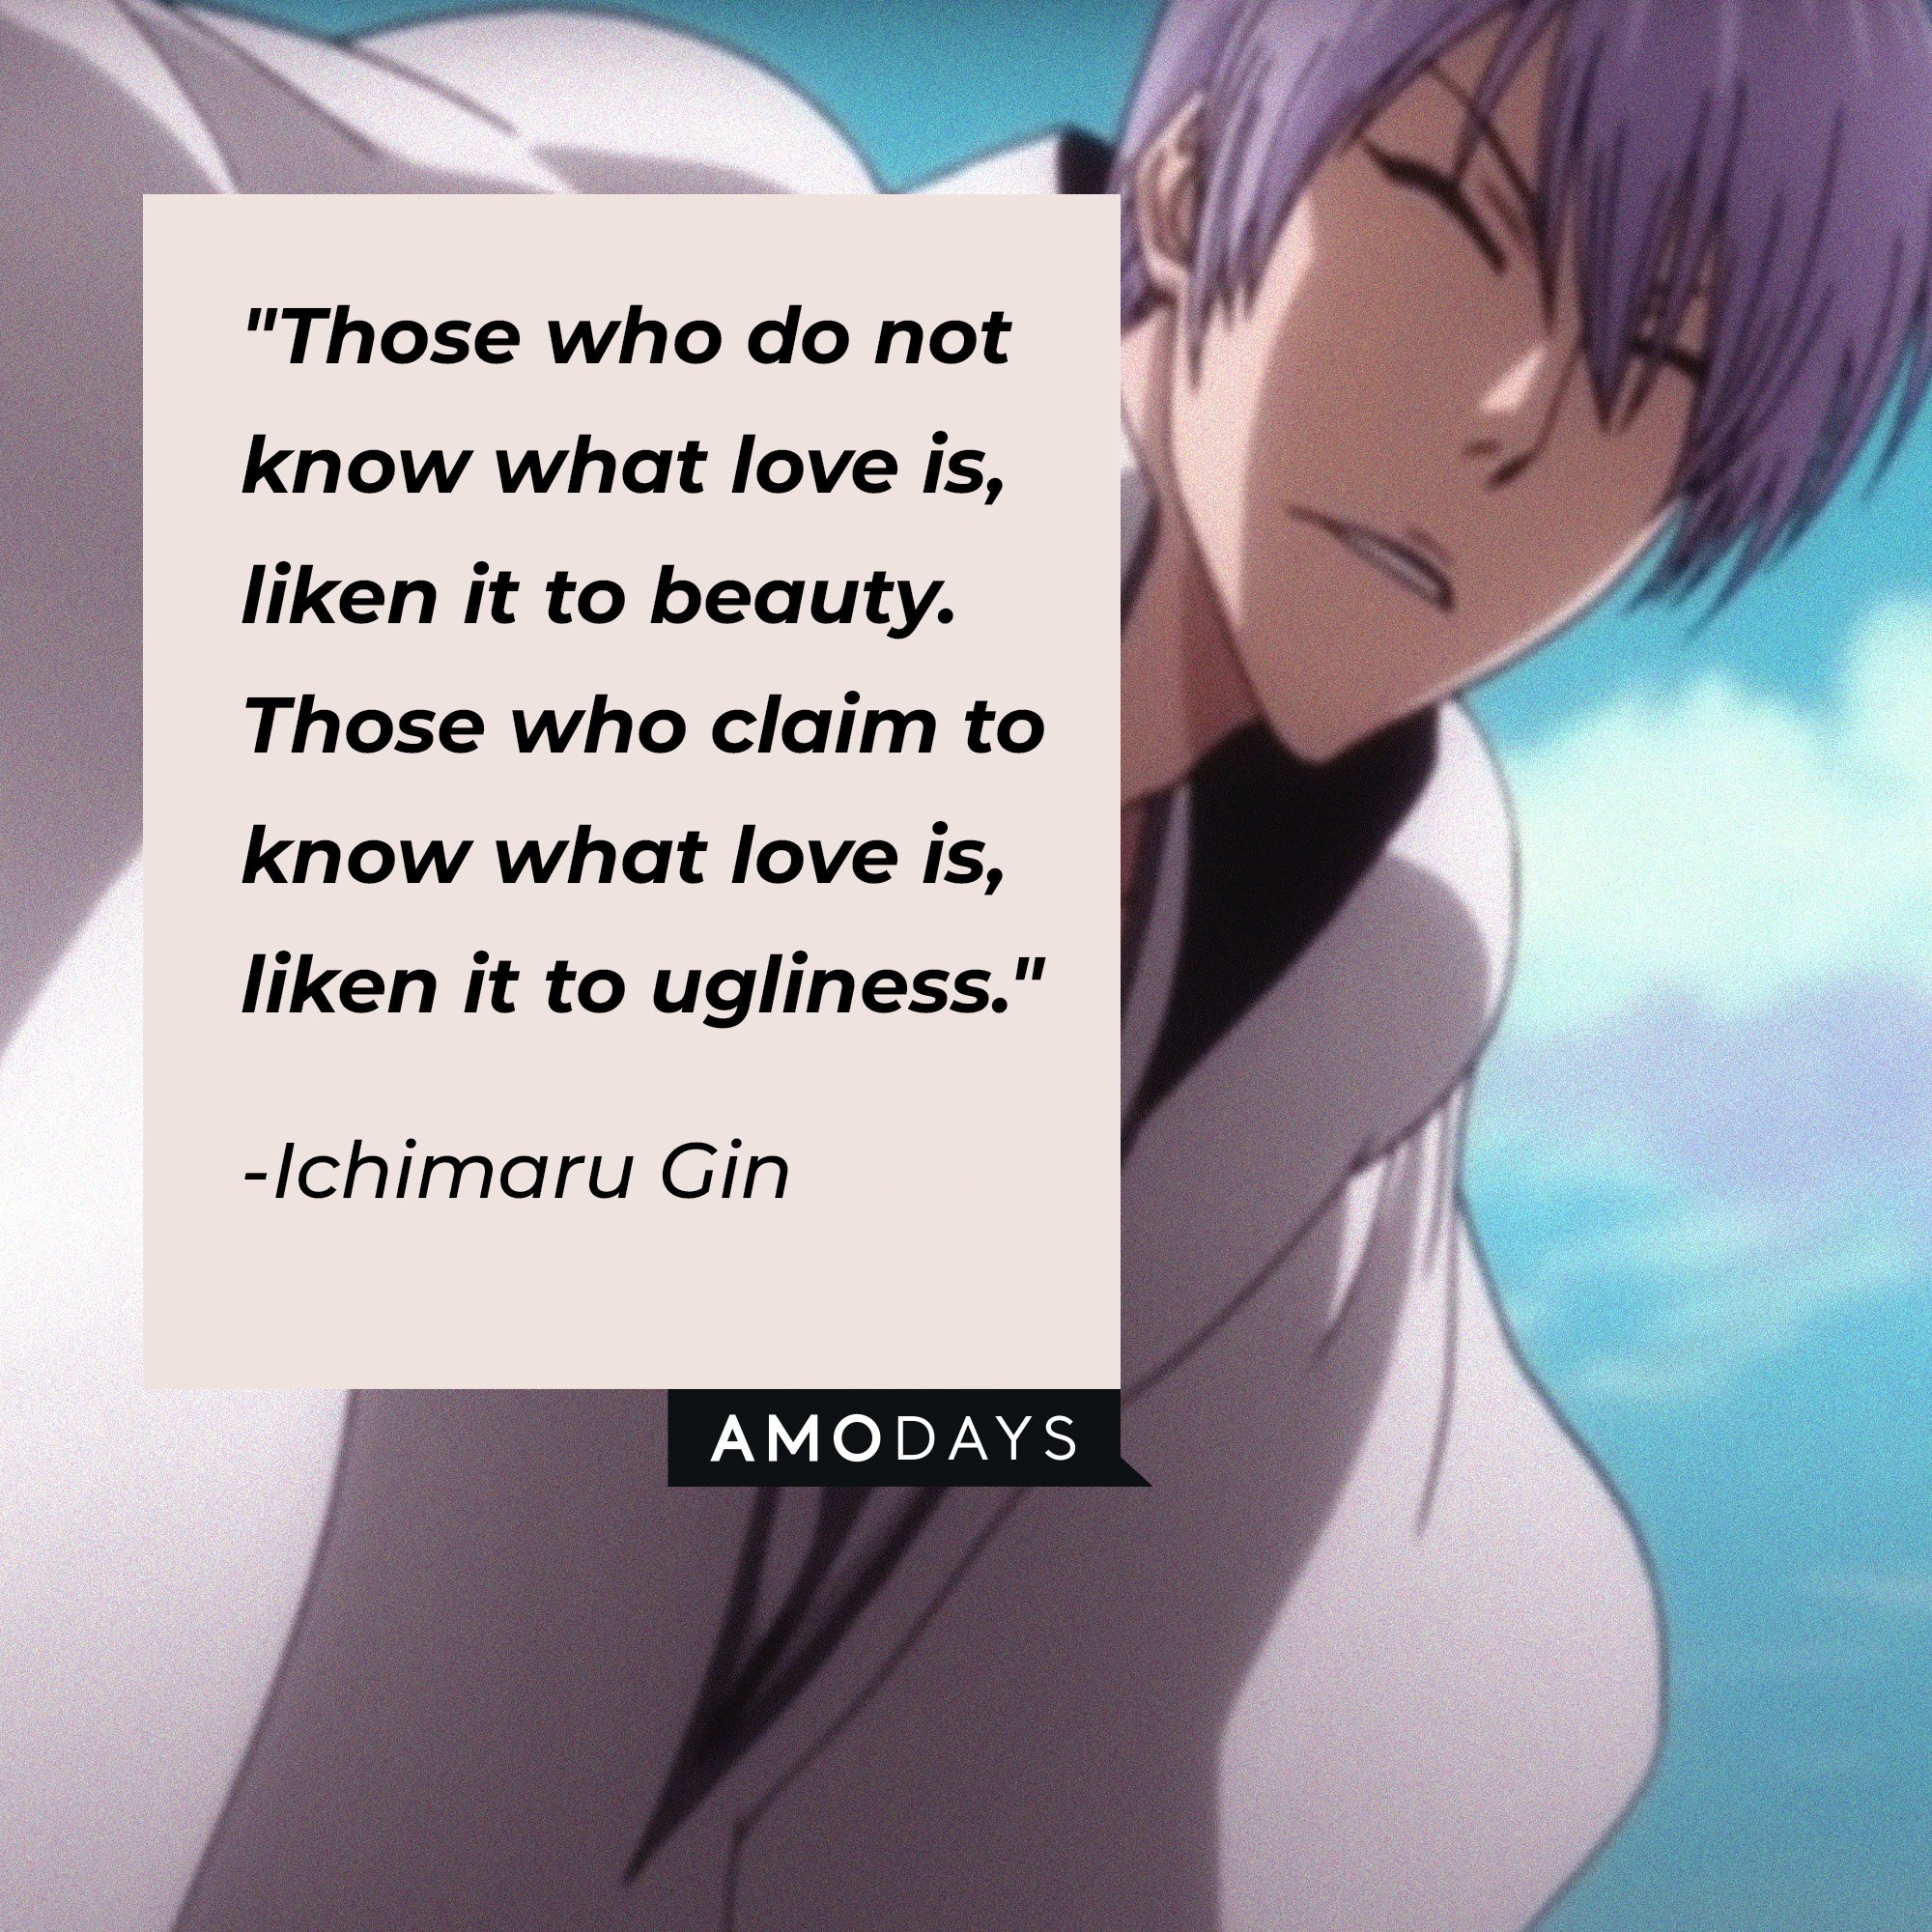  Ichimaru Gin’s quote: "Those who do not know what love is, liken it to beauty. Those who claim to know what love is, liken it to ugliness." | Image: AmoDays